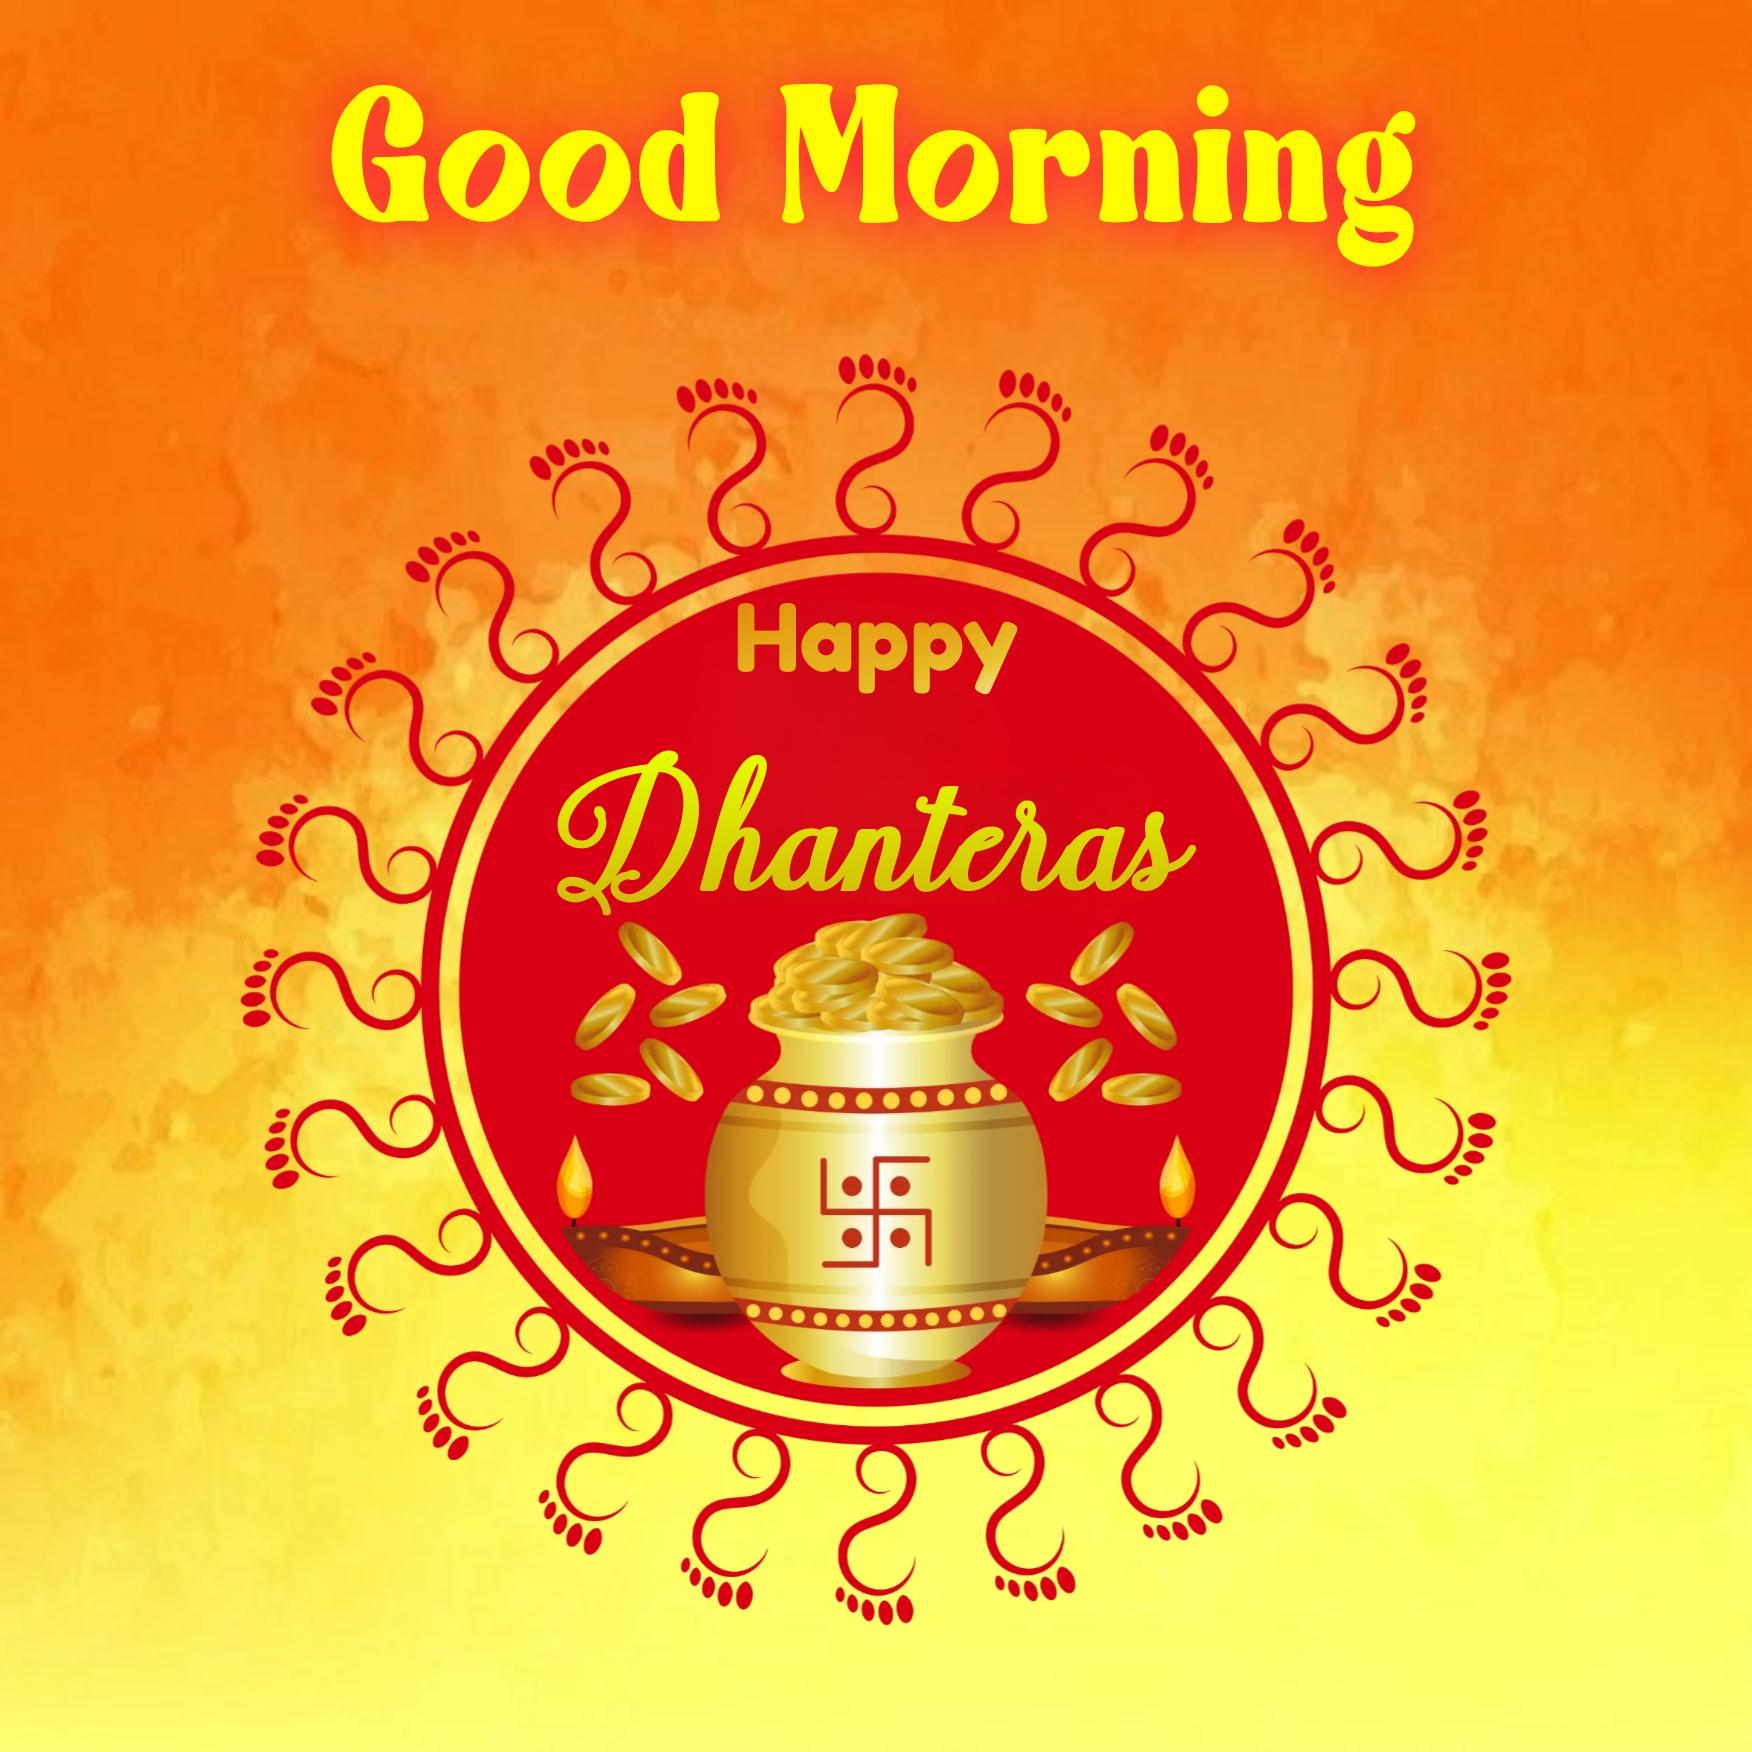 Good Morning Happy Dhanteras Images